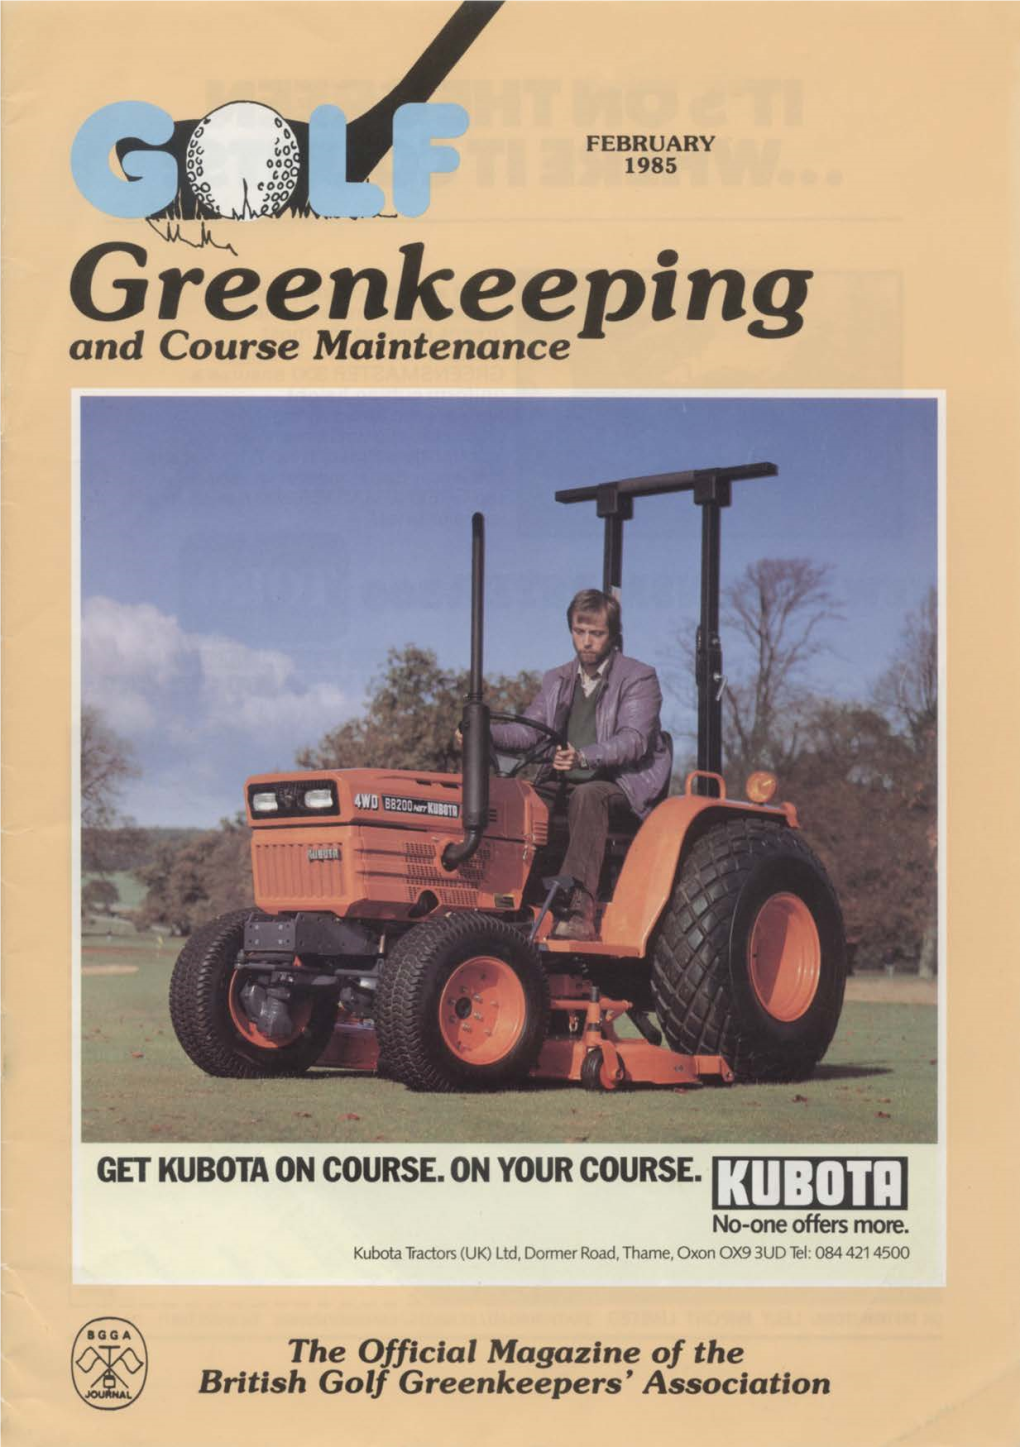 Greenkeeping and Course Maintenance